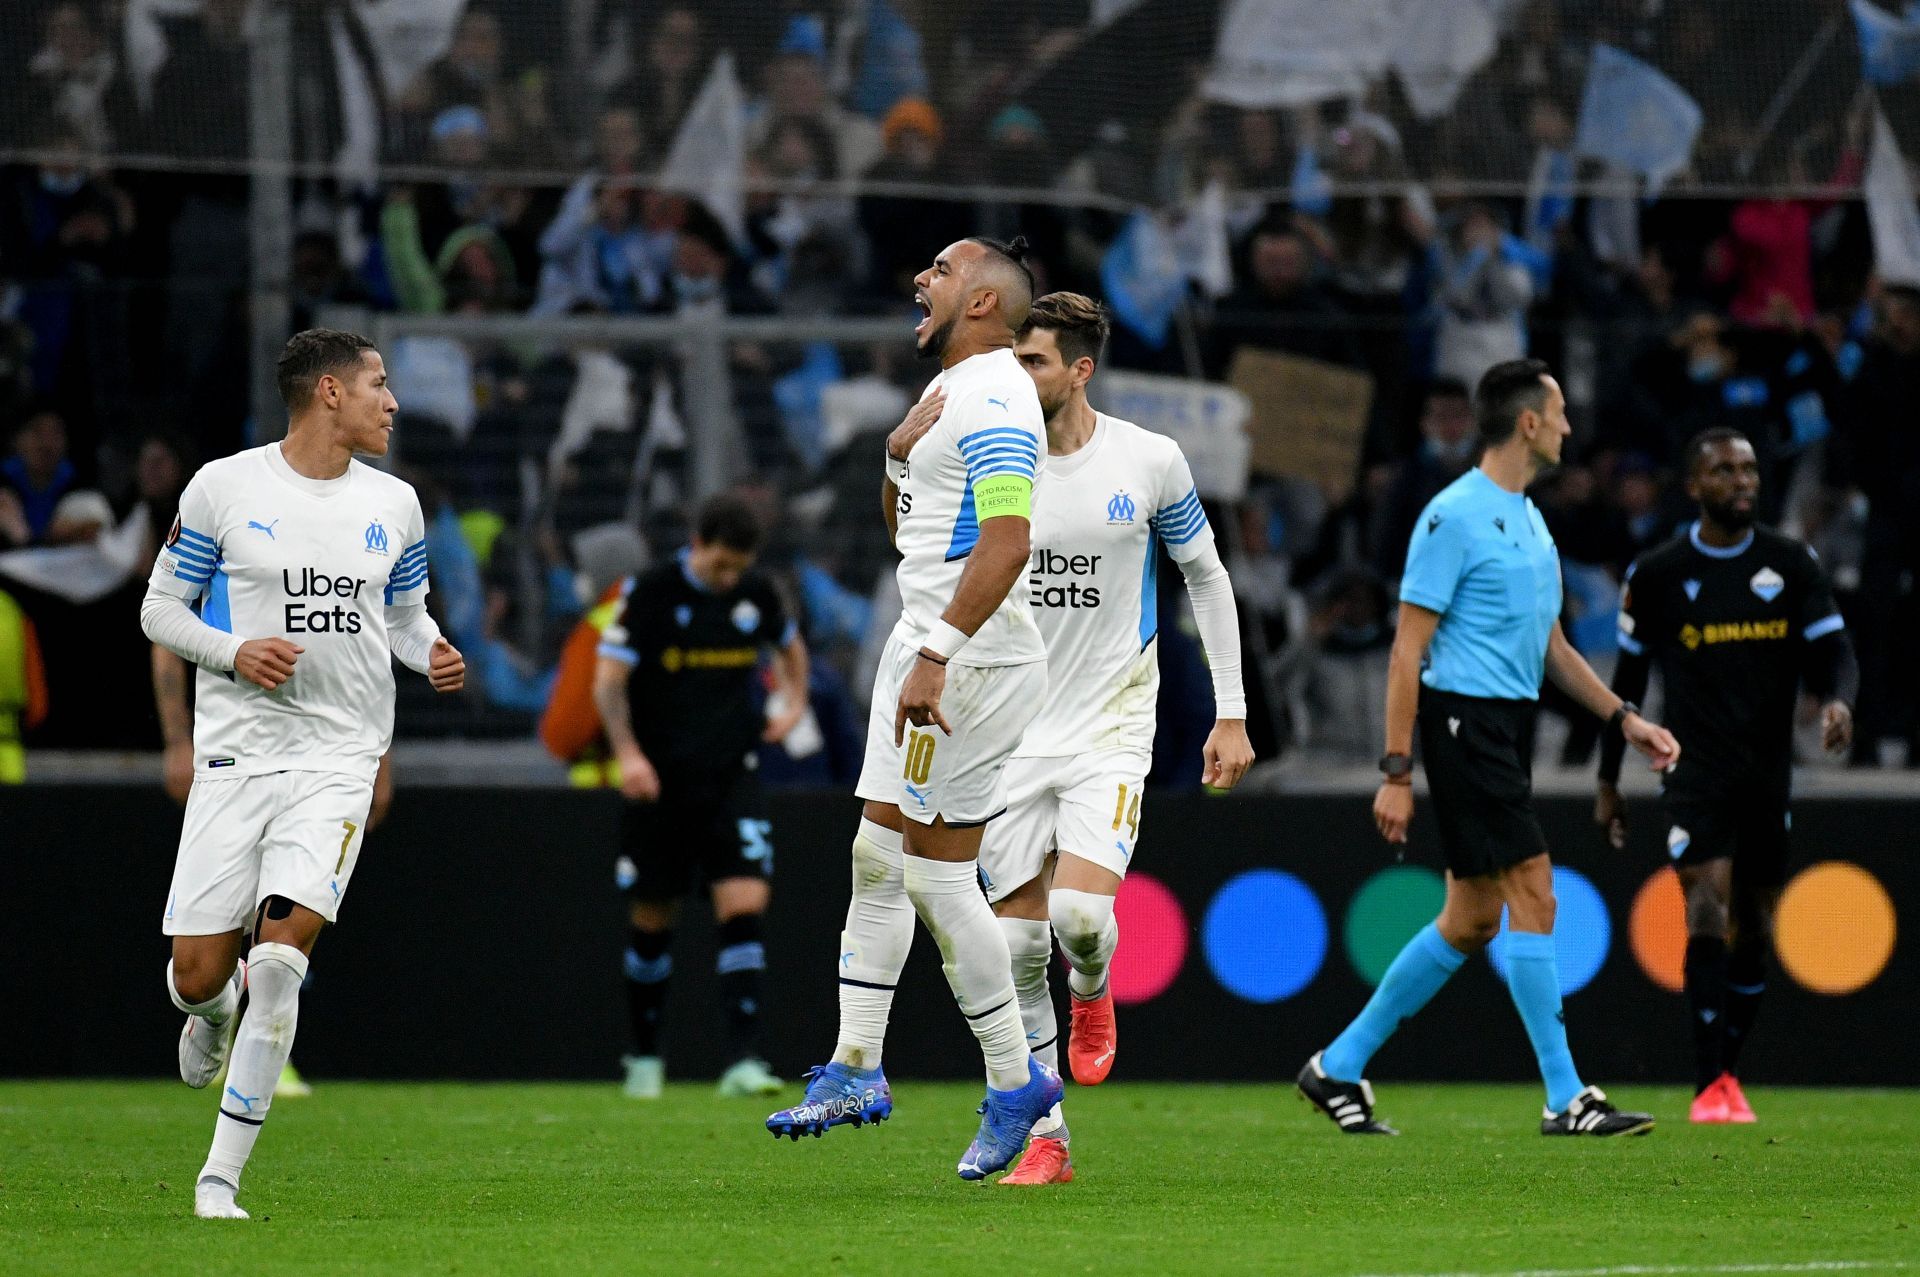 Olympique Marseille and Olympique Lyon square off in a Ligue 1 fixture on Tuesday